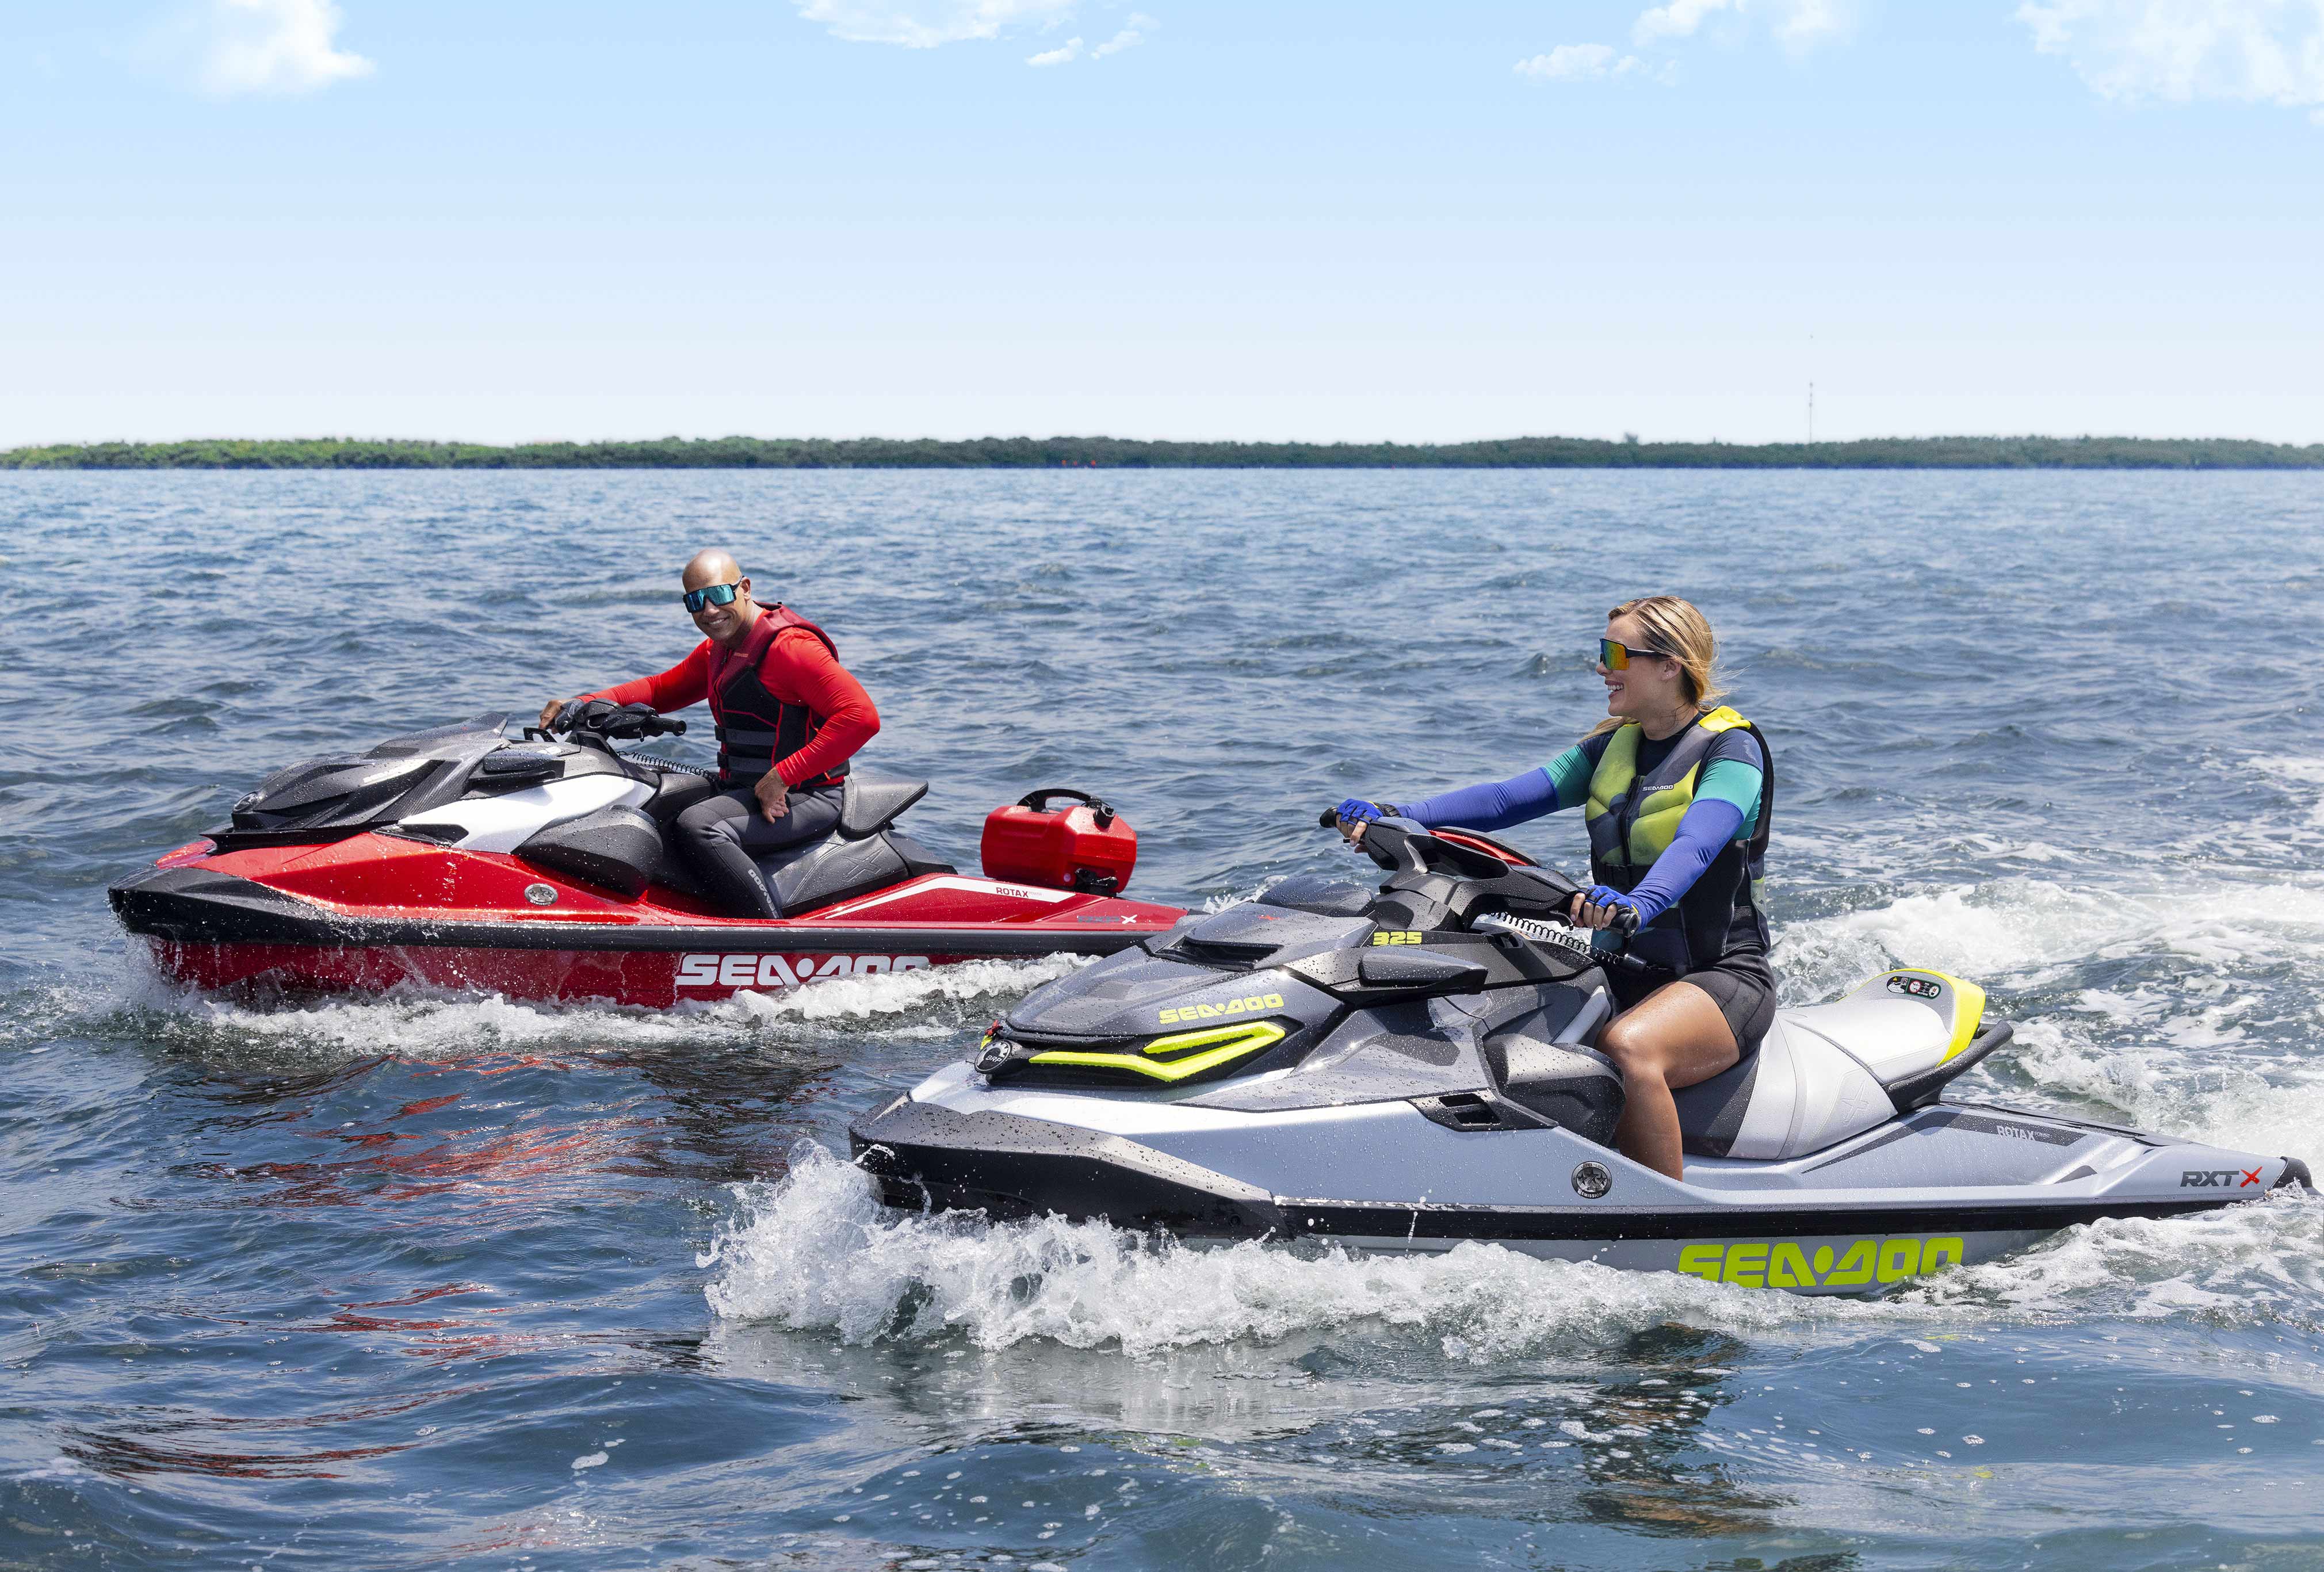 Two Sea-Doo personal watercrafts riding next to one another